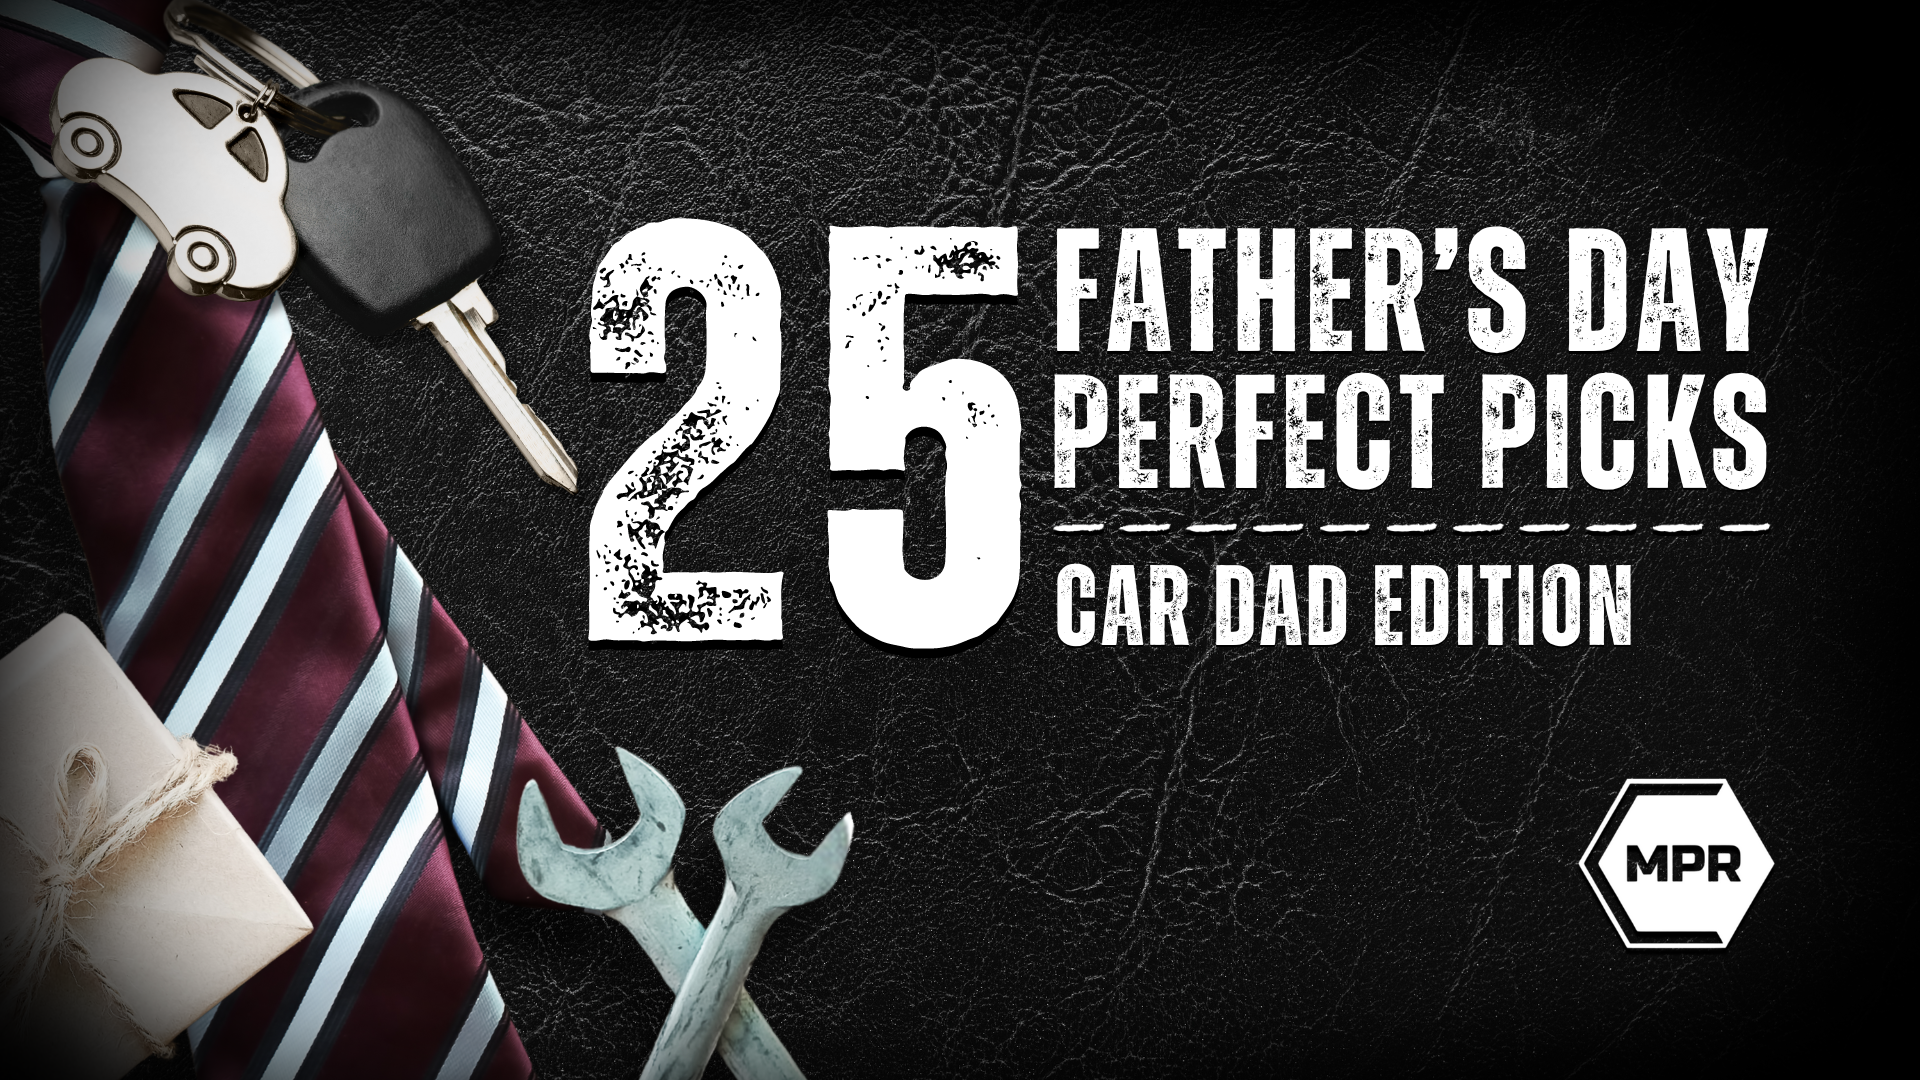 25 Perfect Picks for Father’s Day: Car Dad Edition